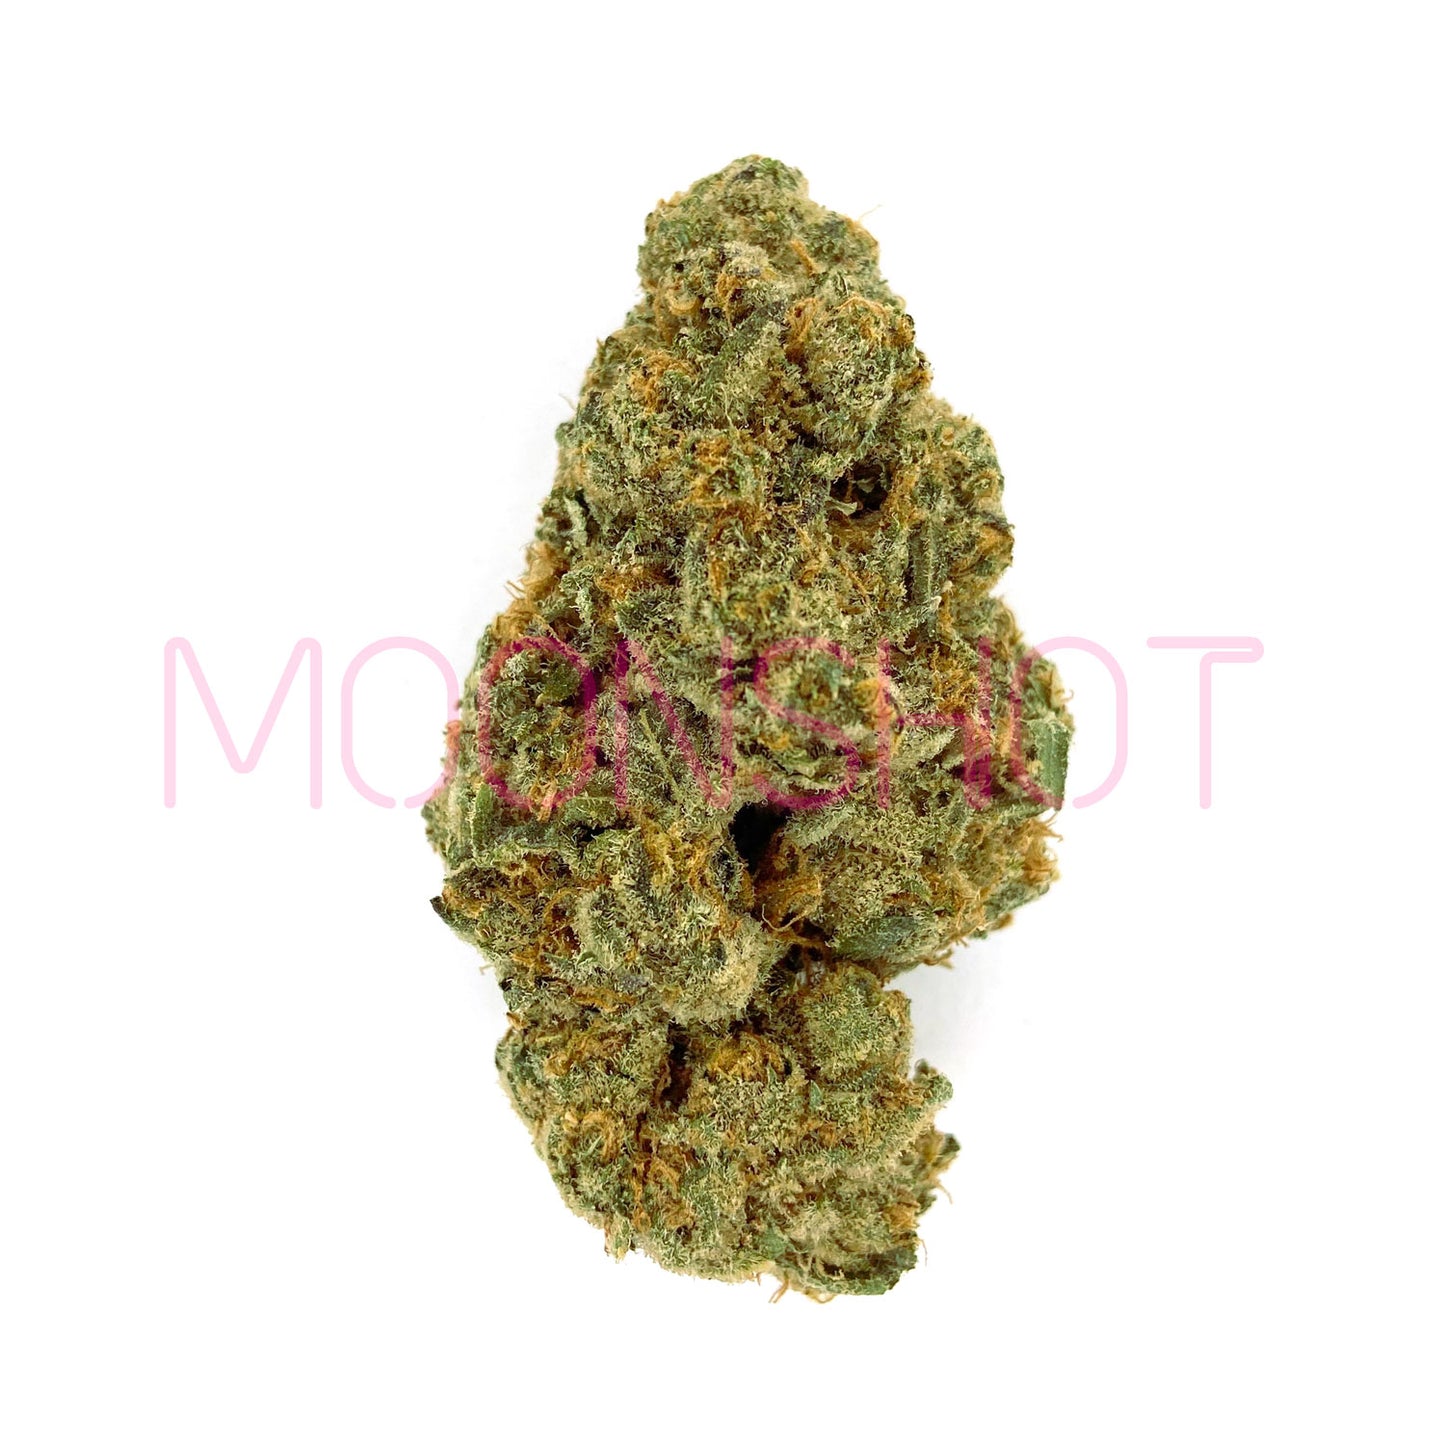 A nug of cannabis flower from the Headband strain sits against a white background.